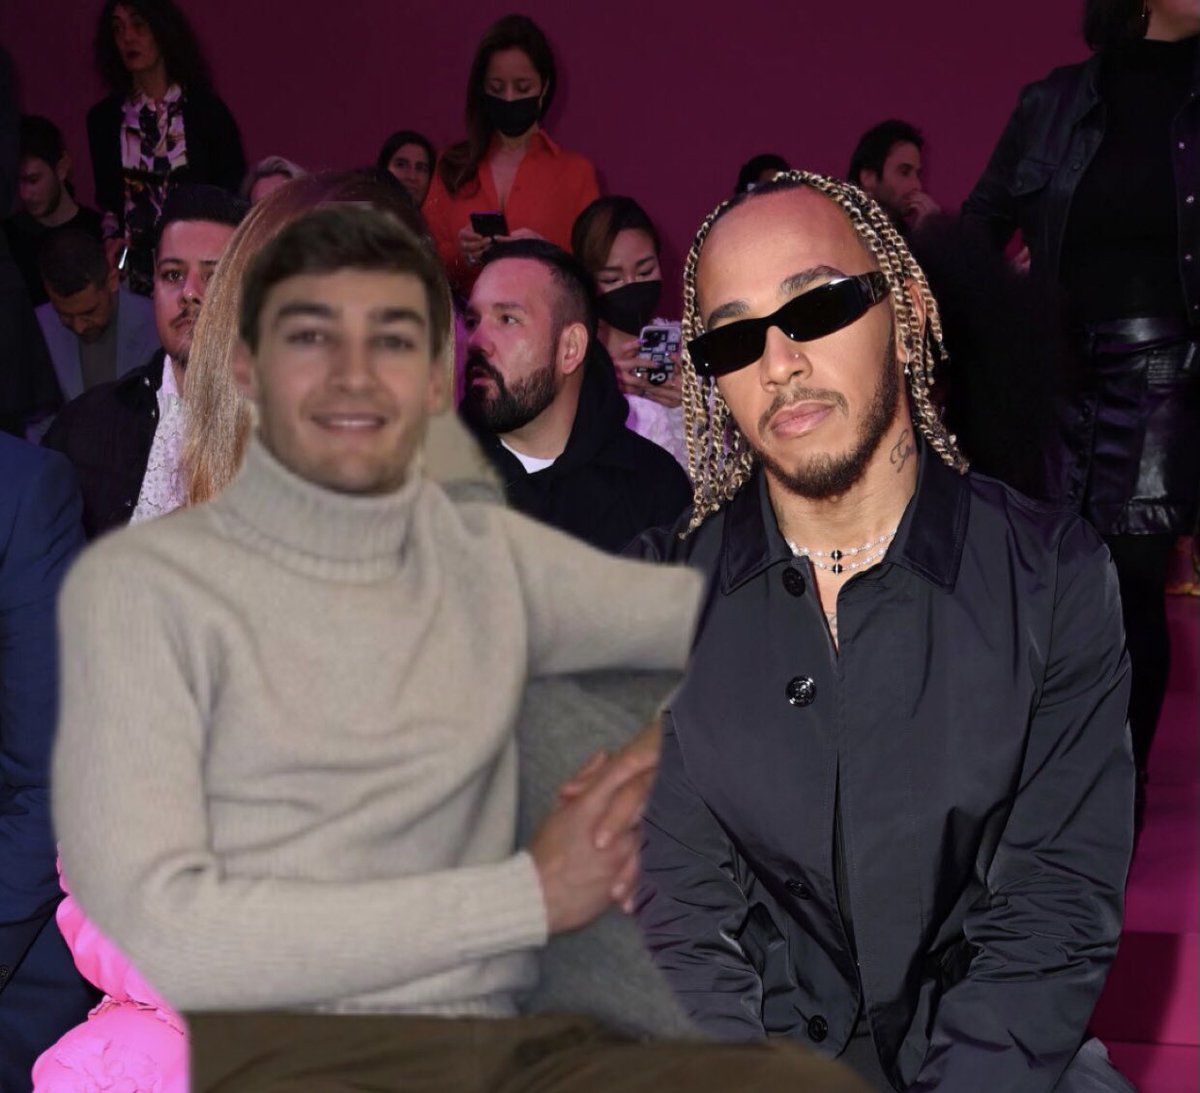 RT @doenjaaa8: George Russell and Lewis Hamilton at Paris fashion week! https://t.co/42RTQ2IGhl